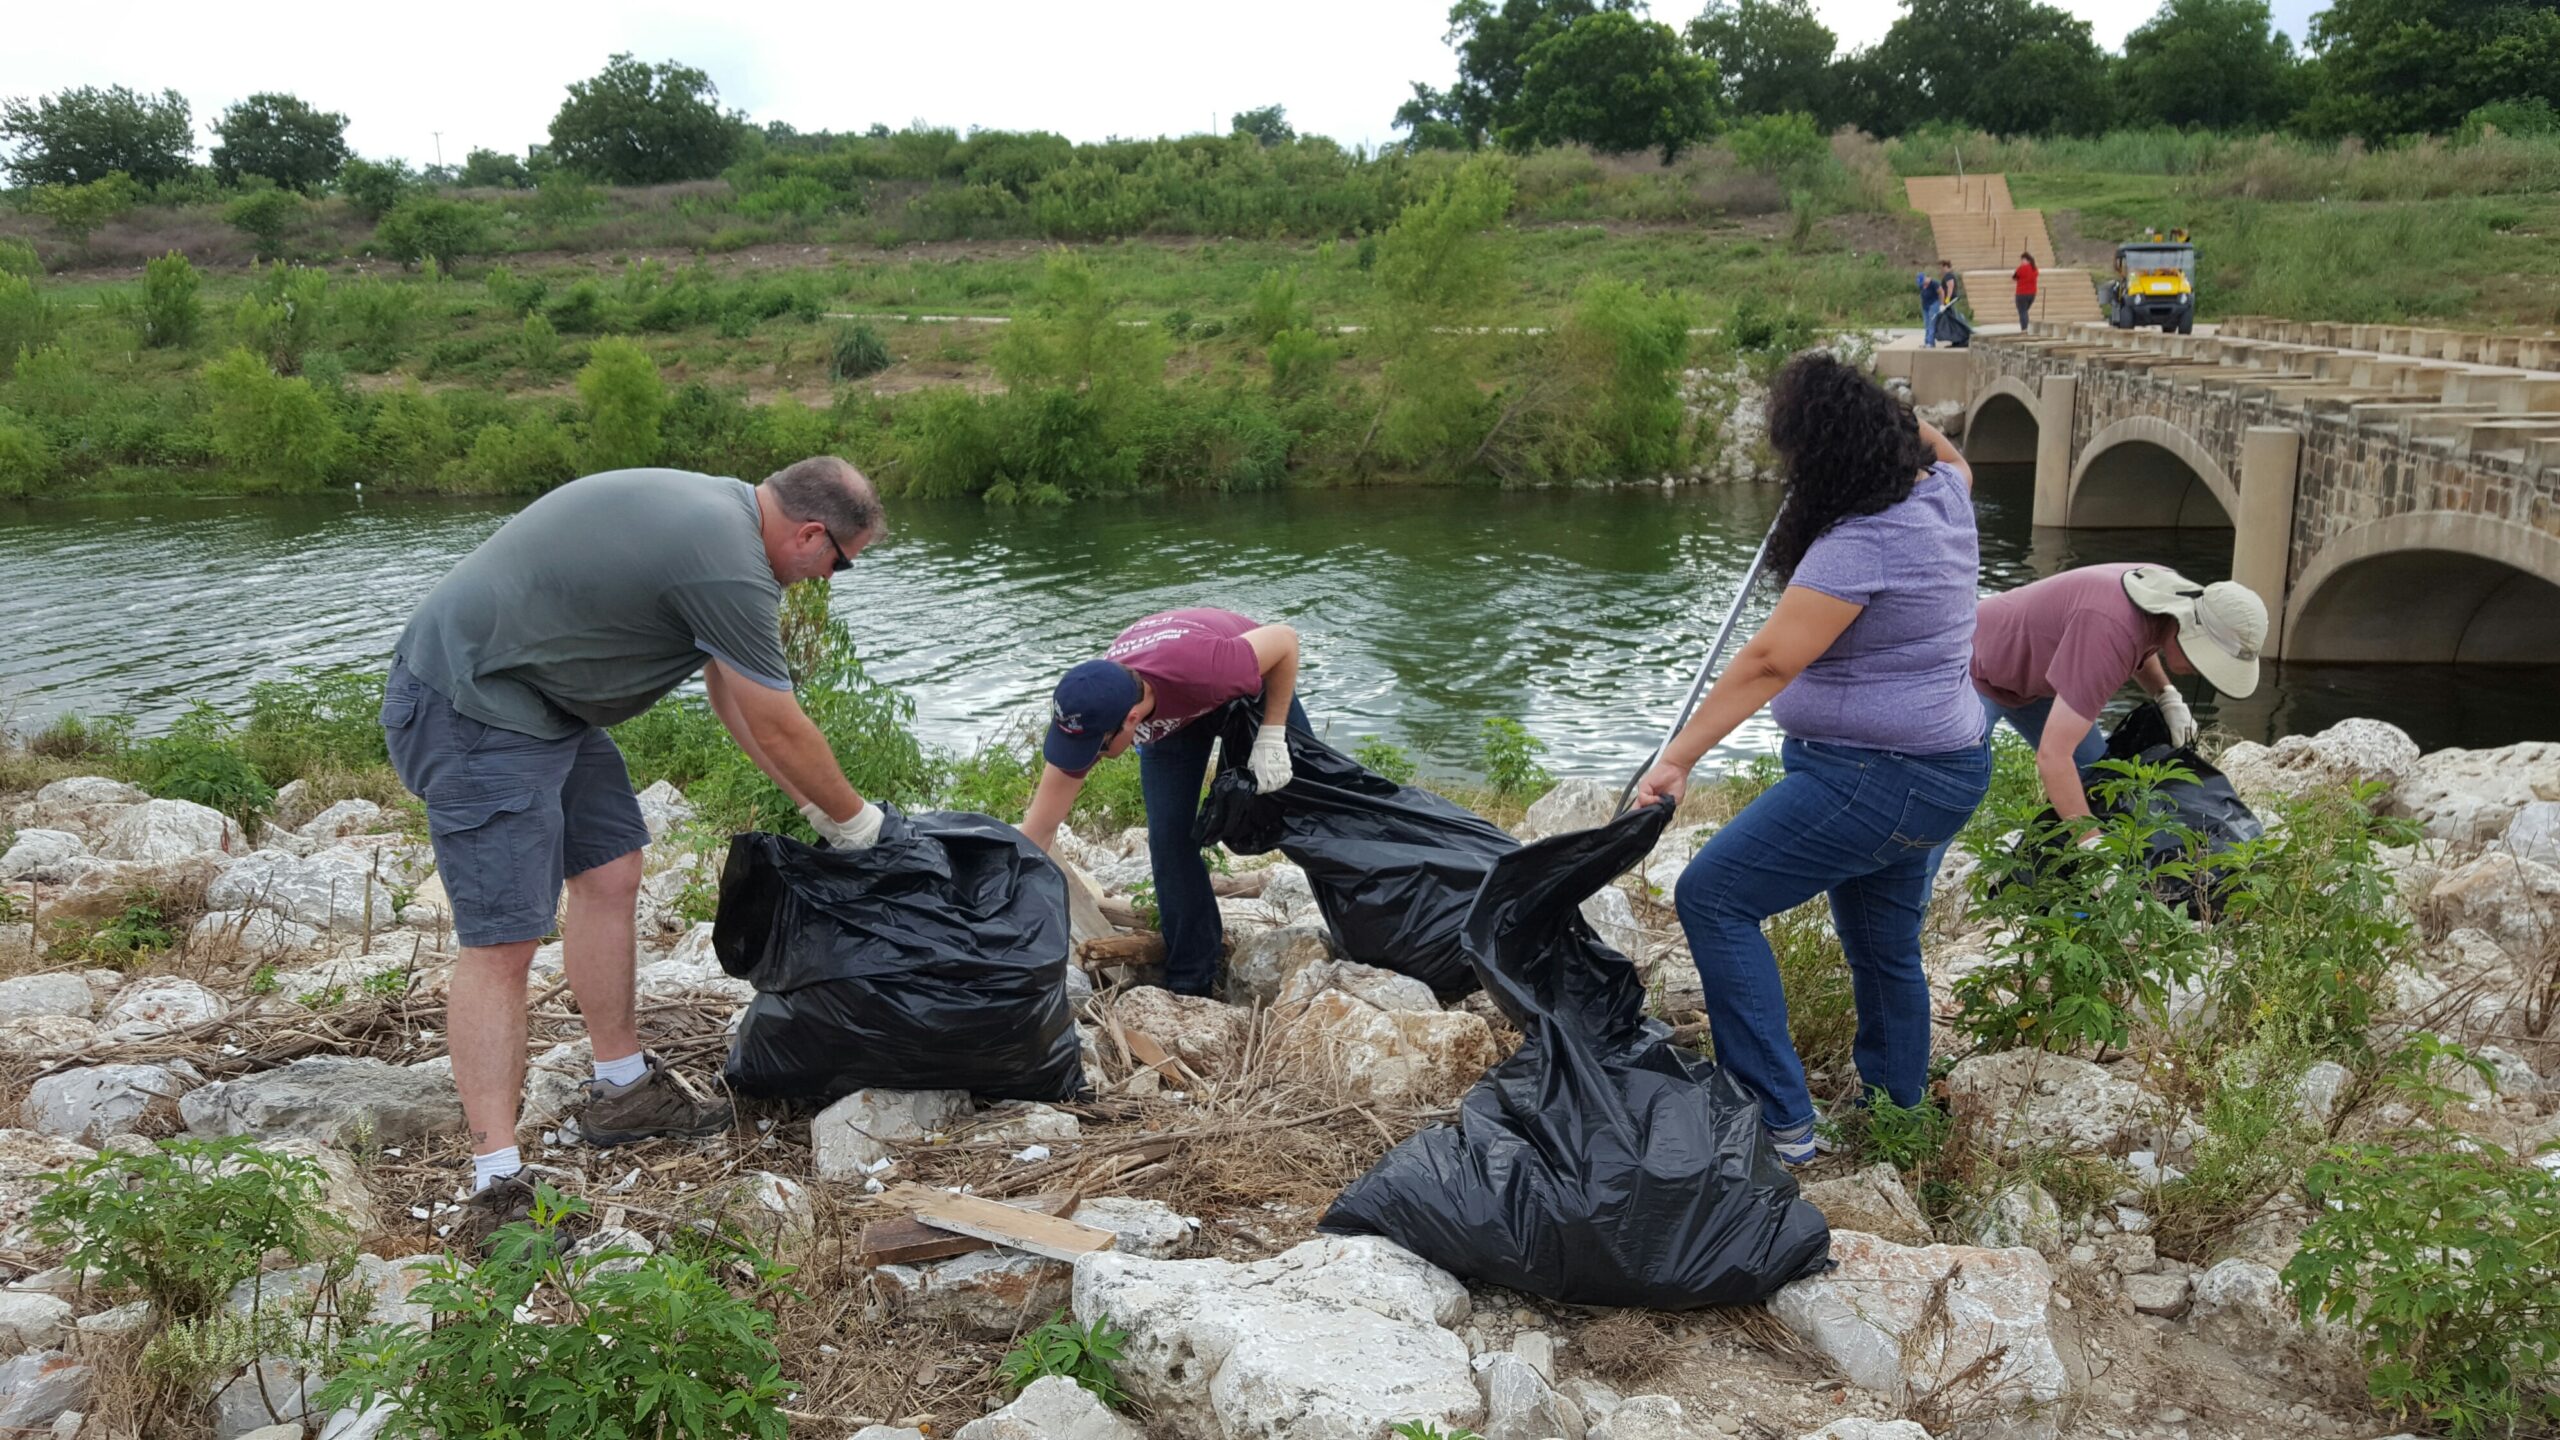 River Warrior volunteers taking part in post storm event cleanup on the Mission Reach San Antonio River Walk segment